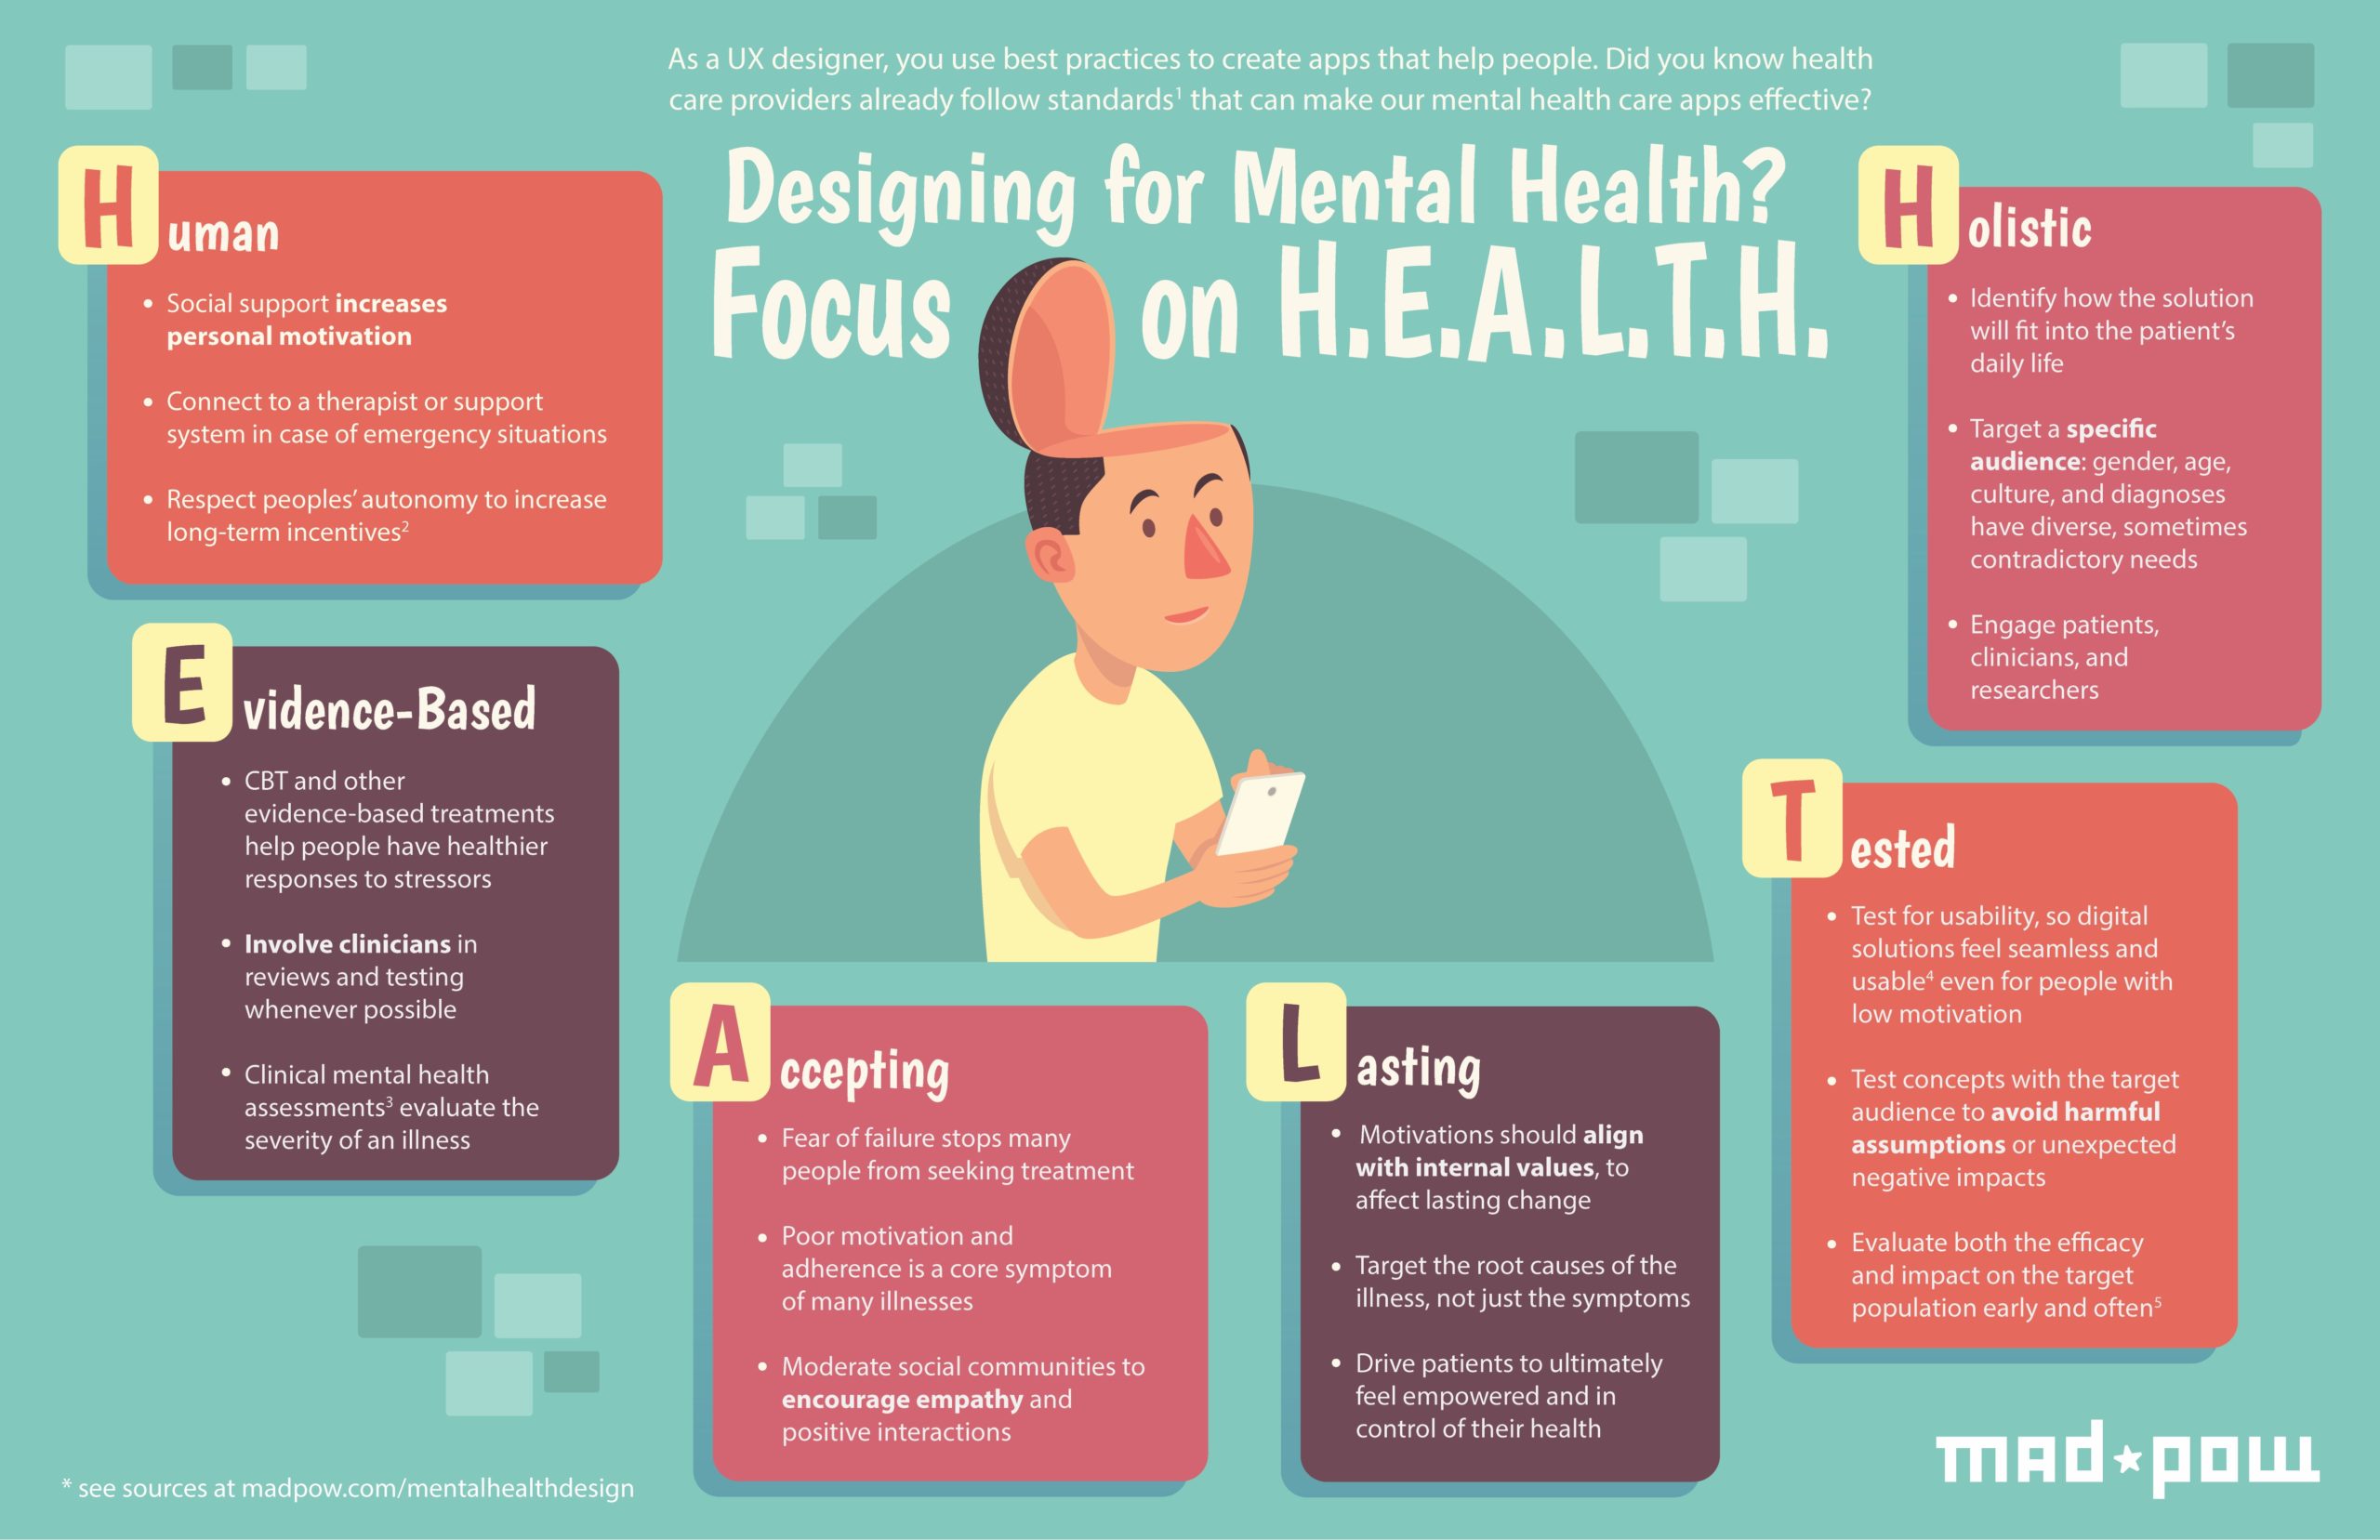 How to design for mental health apps